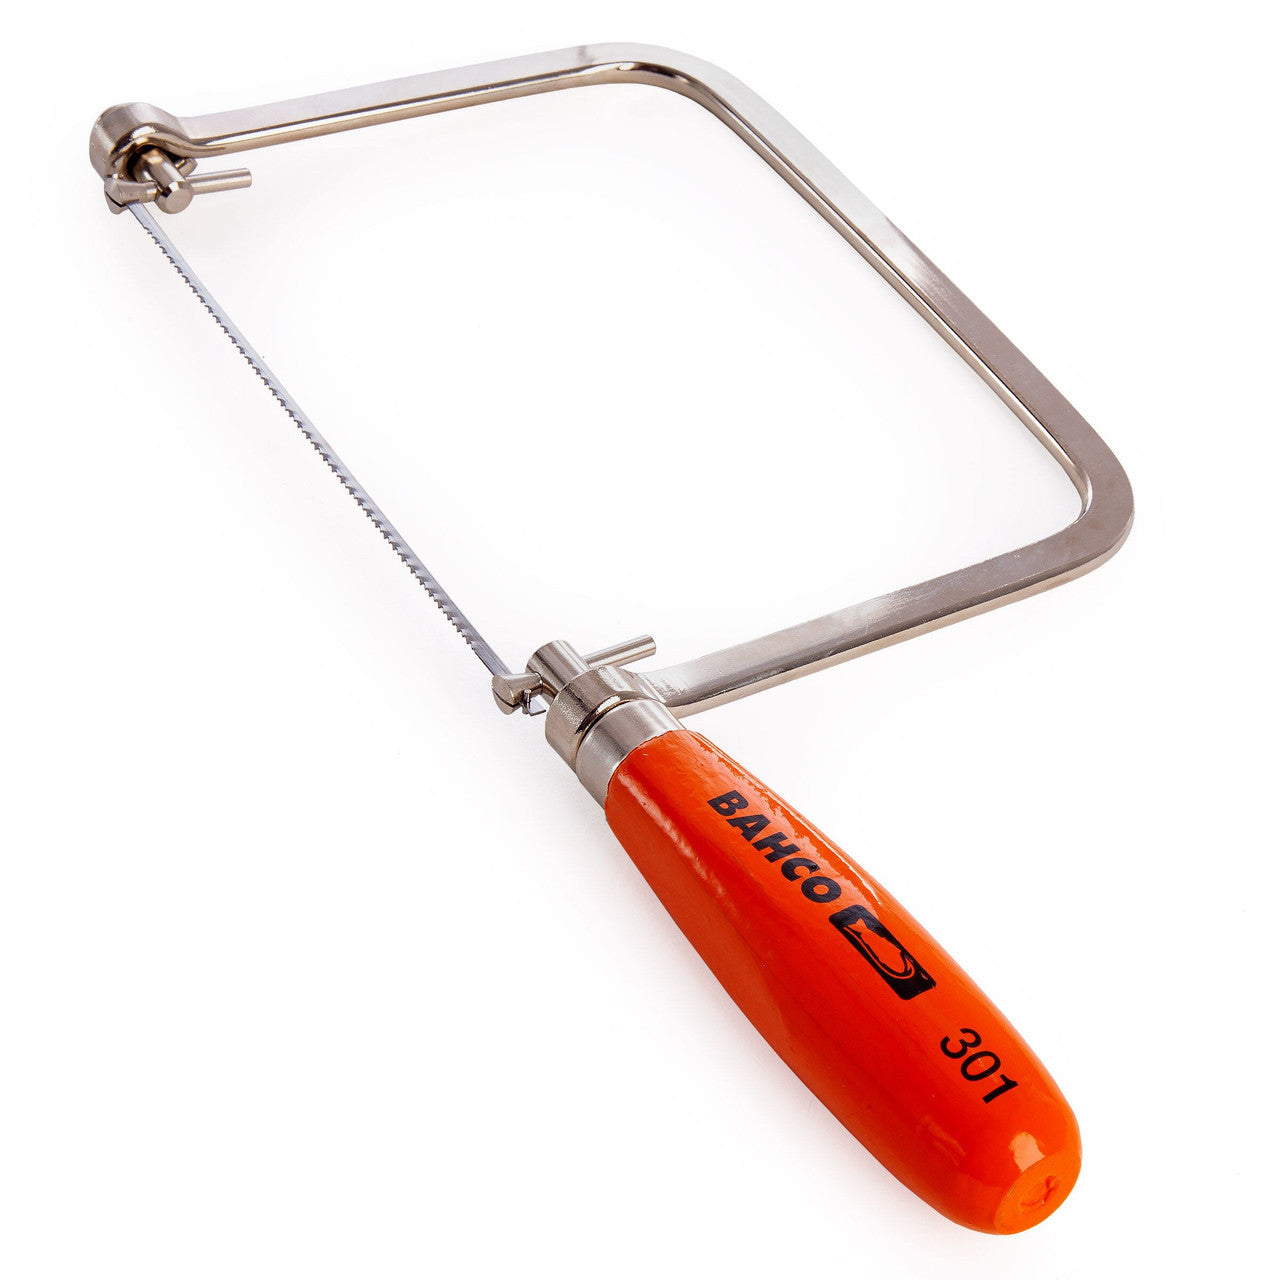 Bahco 301 Coping Saw 165mm (6.5")